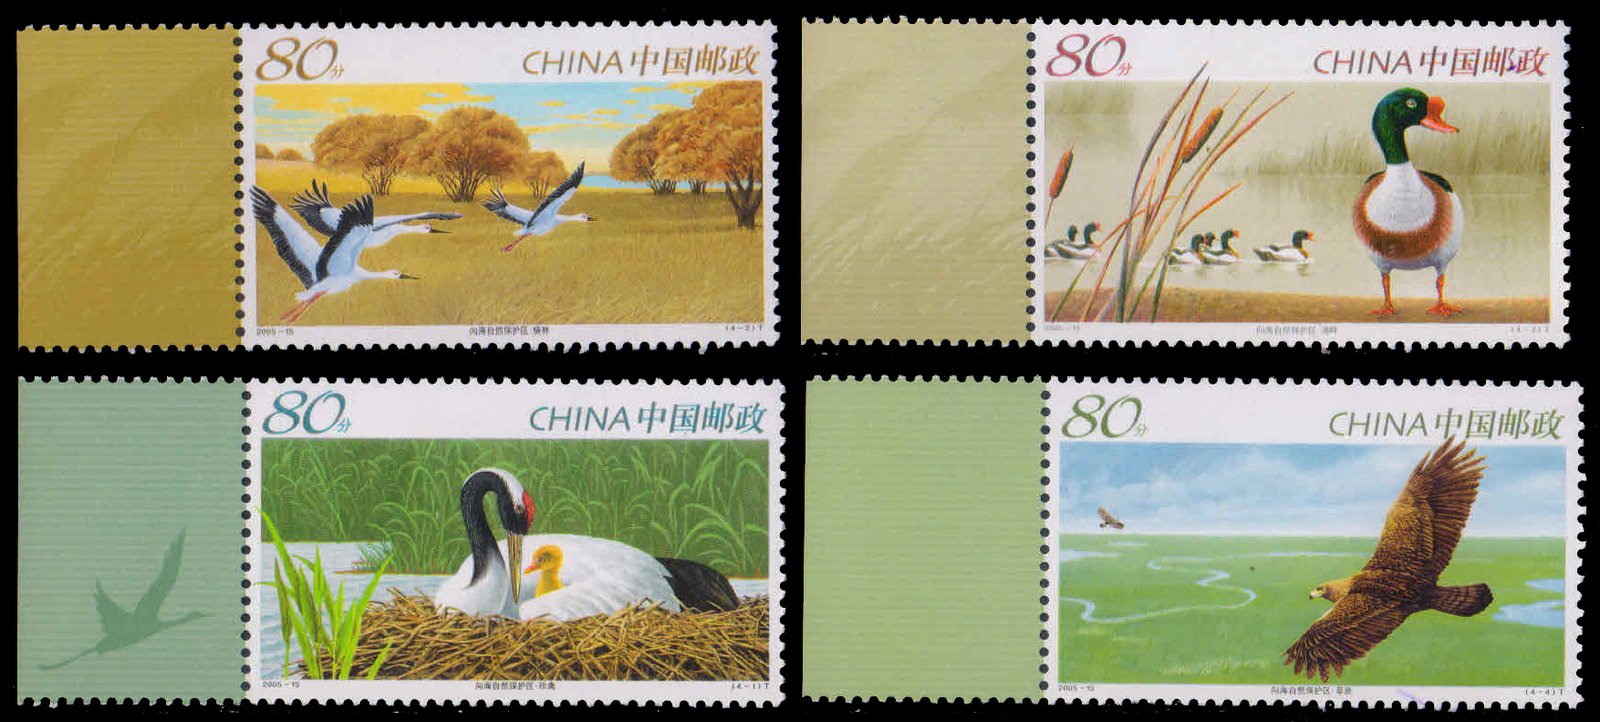 CHINA 2005-Birds, Crans and Chick, Eagle, Set of 4, MNH, S.G. 5000-5003-Cat £ 8-